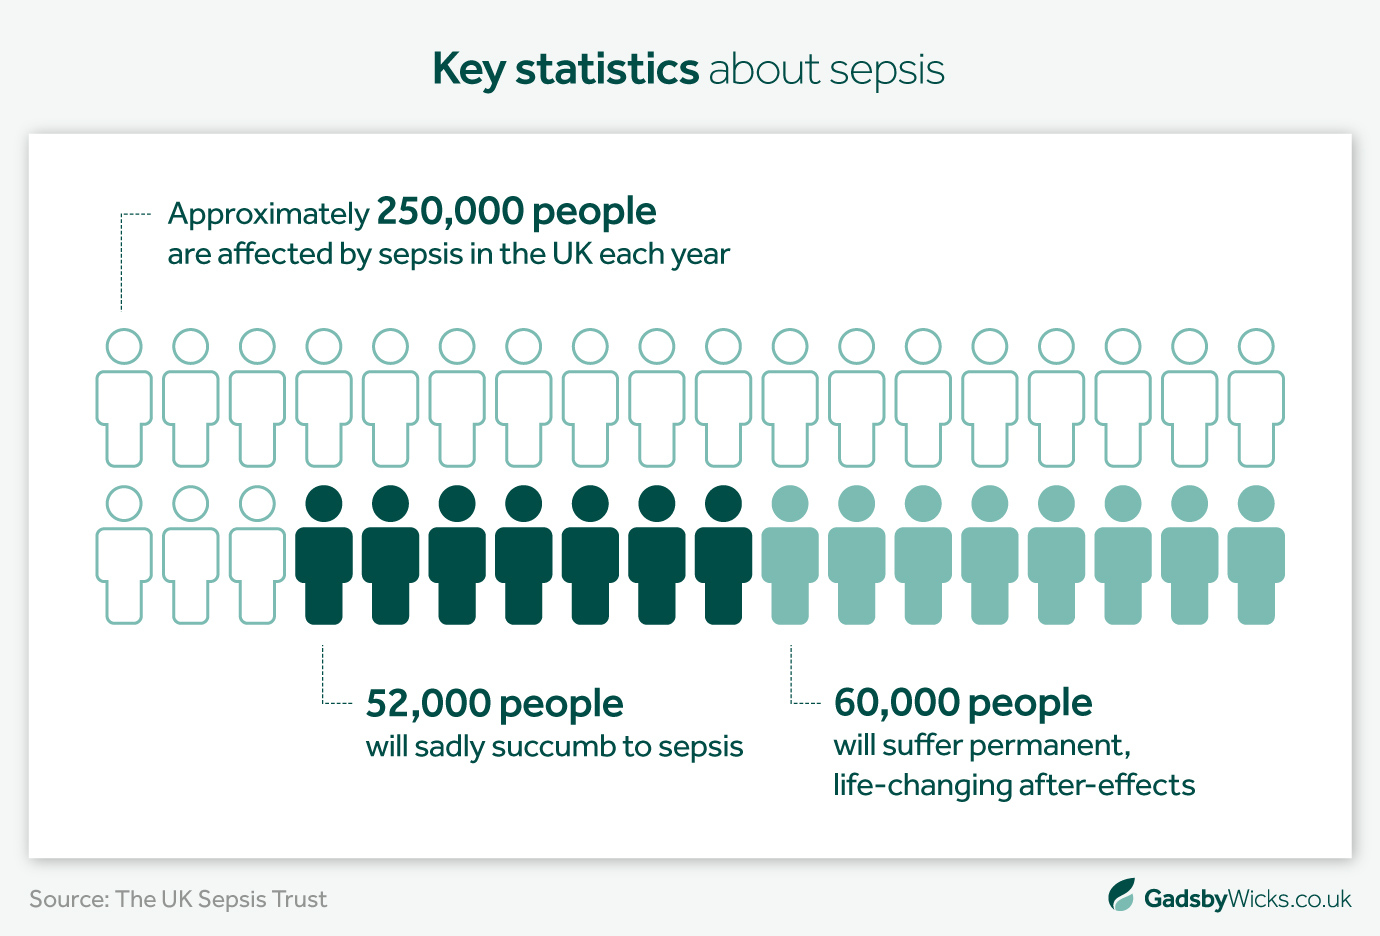 Sepsis key statistics from The UK Sepsis Trust - 250,000 people affected per year - Infographic